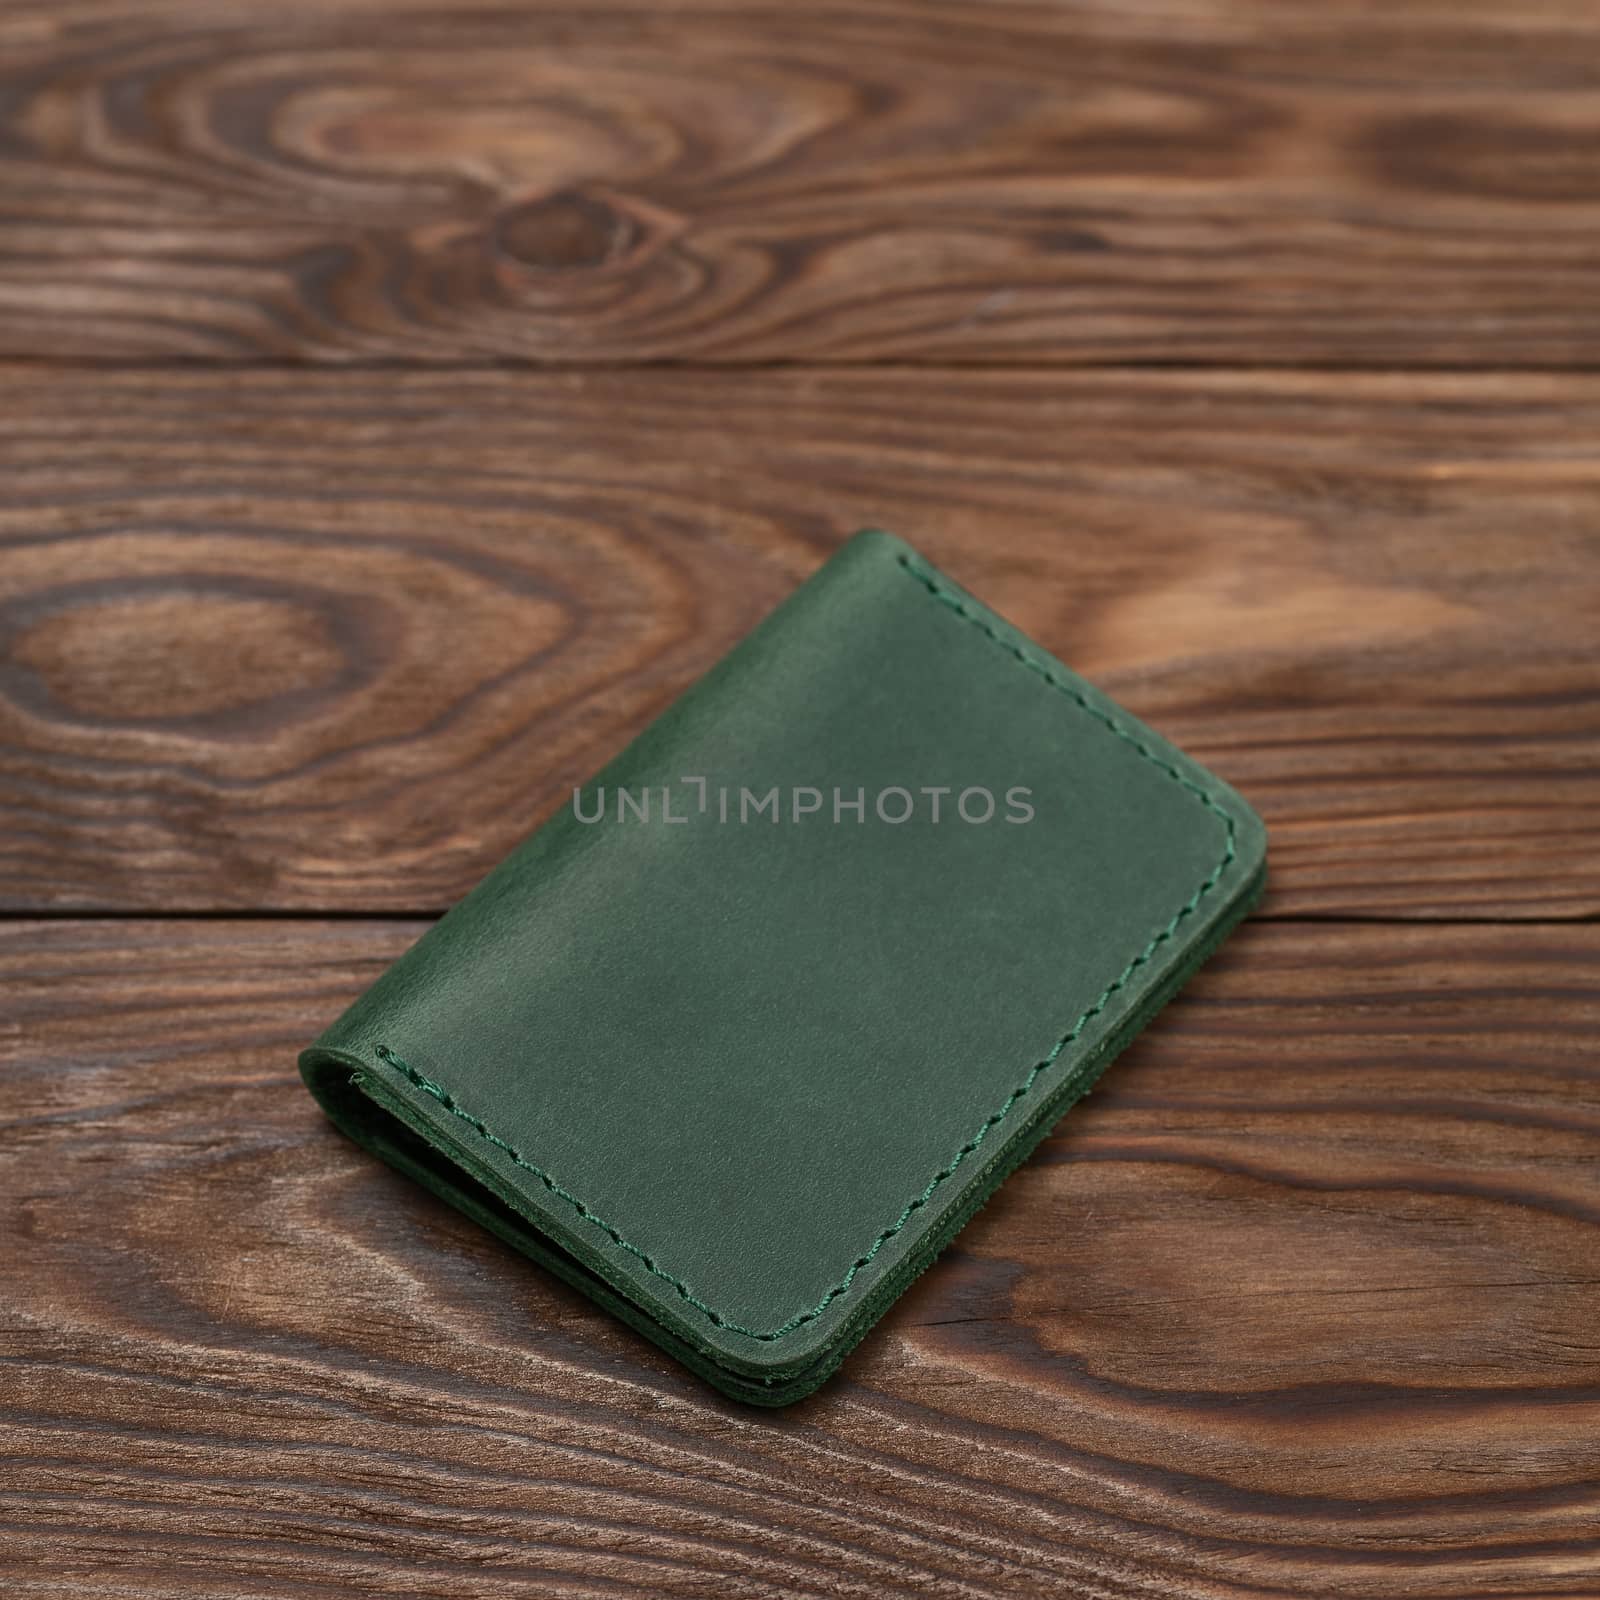 Green two-pocket closed leather handmade cardholder lies on wooden background. Soft focus on background. Stock photo on blurred background.